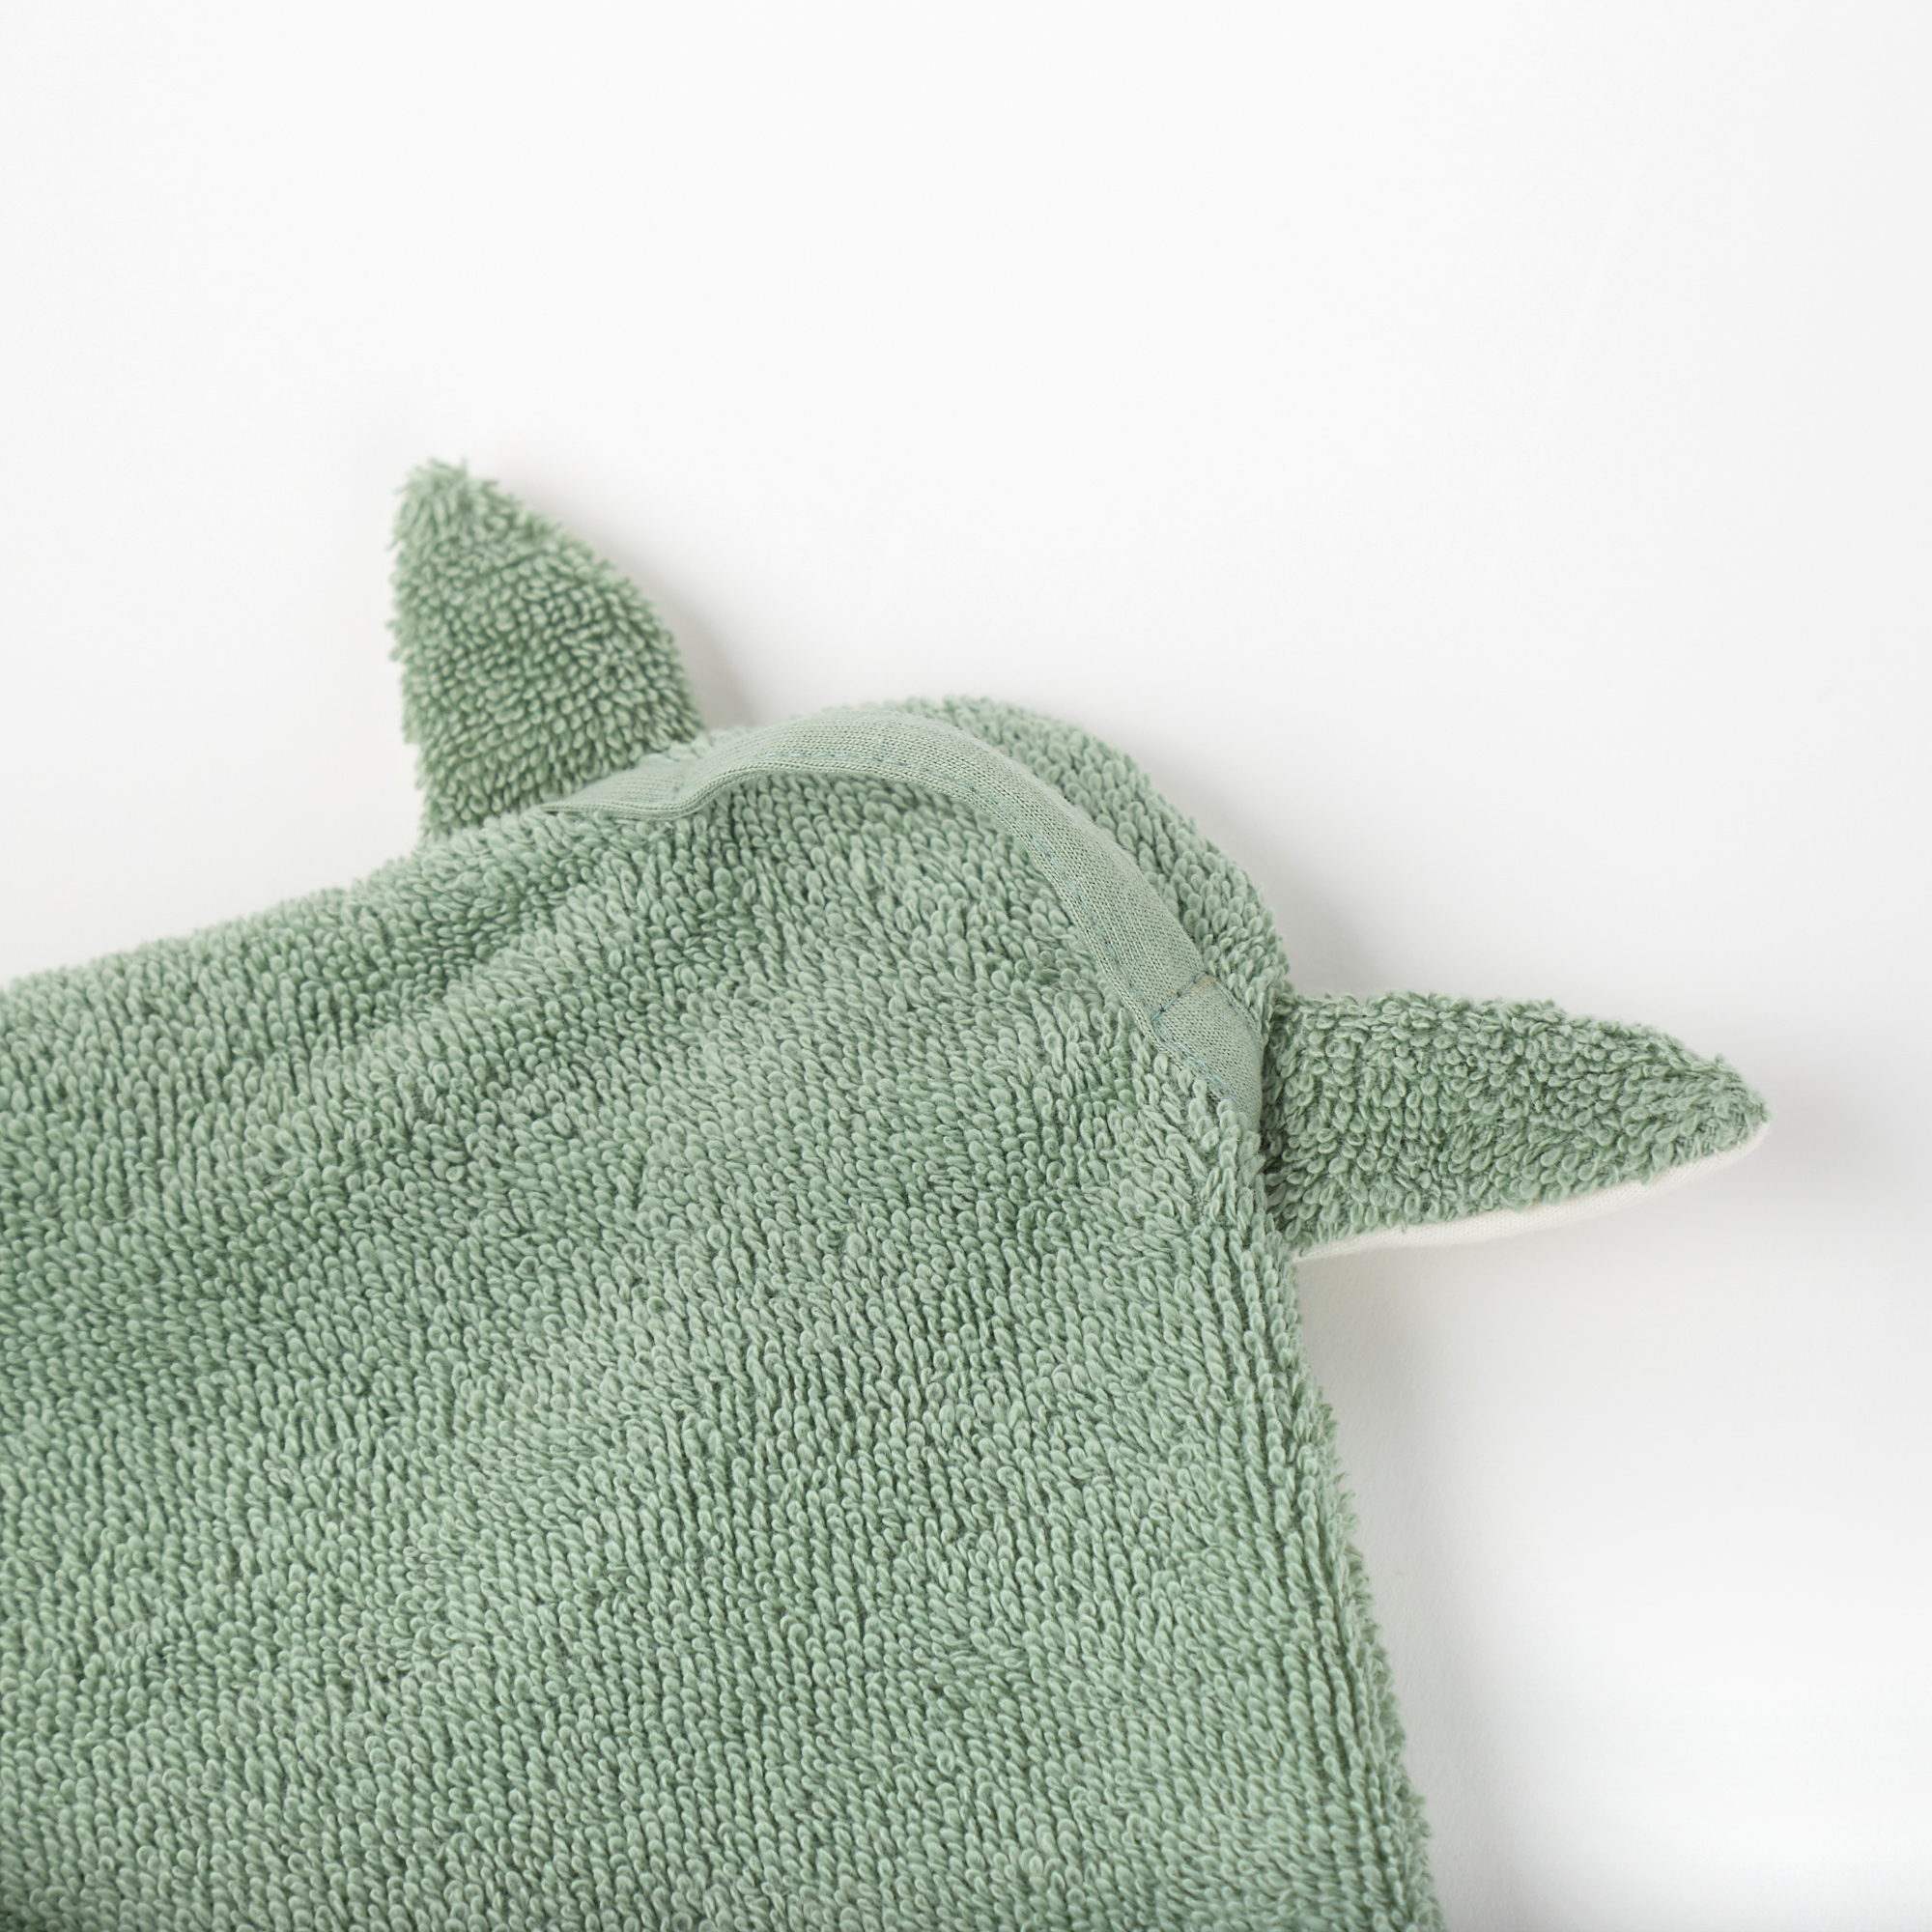 Hooded baby & toddler bath towel dino, green